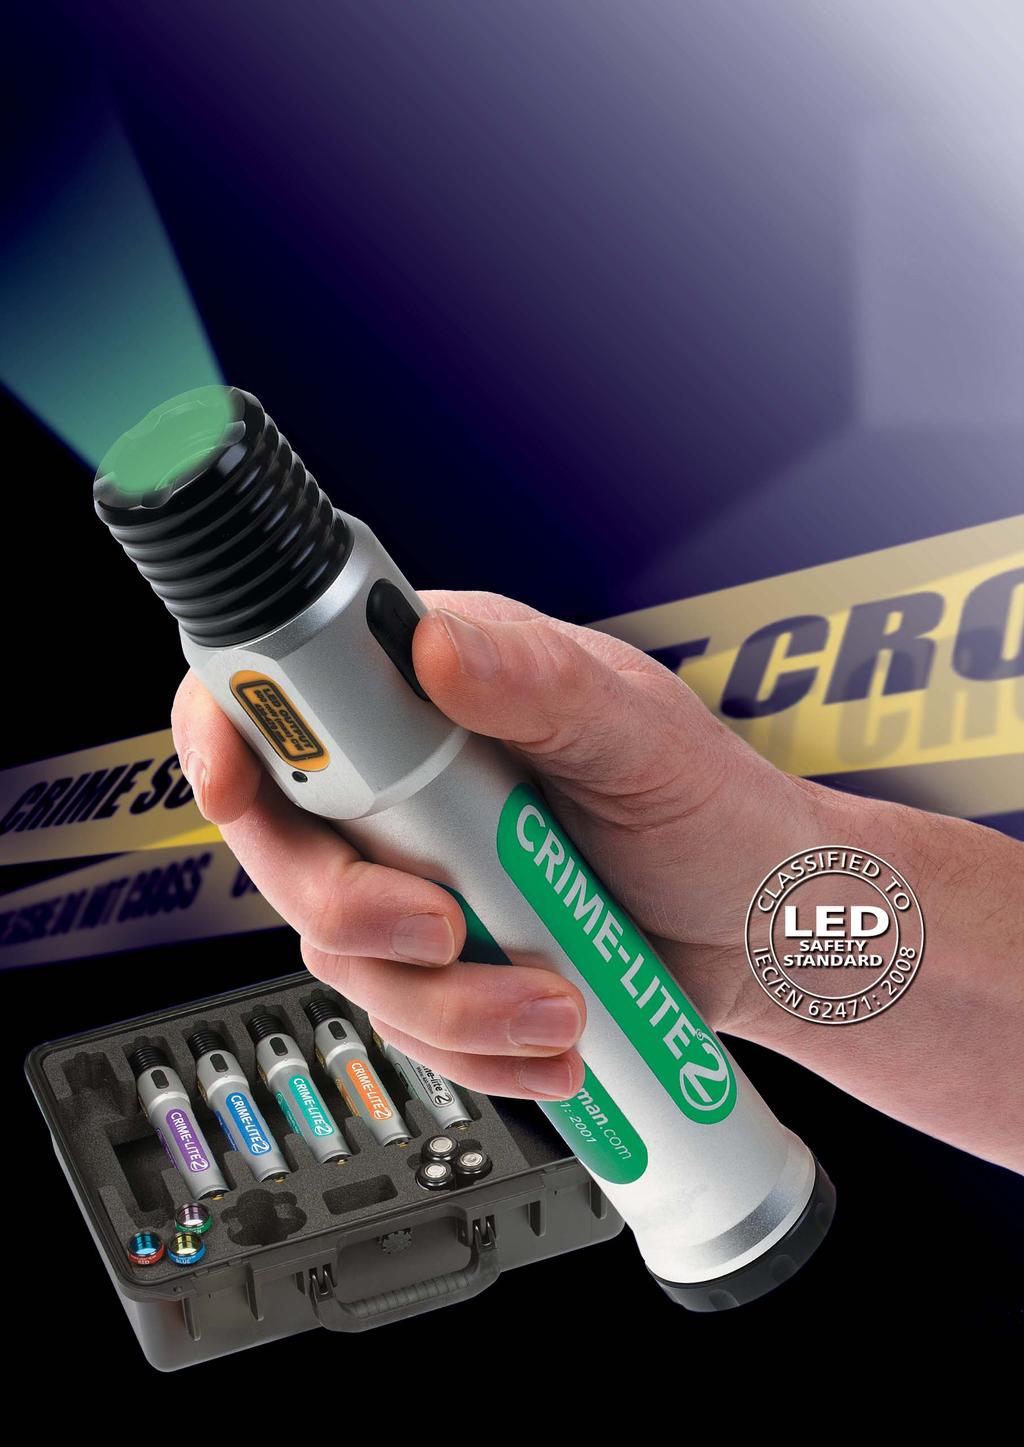 FF(UK):08/11/A Crime-lite 2 a new and improved range of forensic light sources Higher intensity Constant light